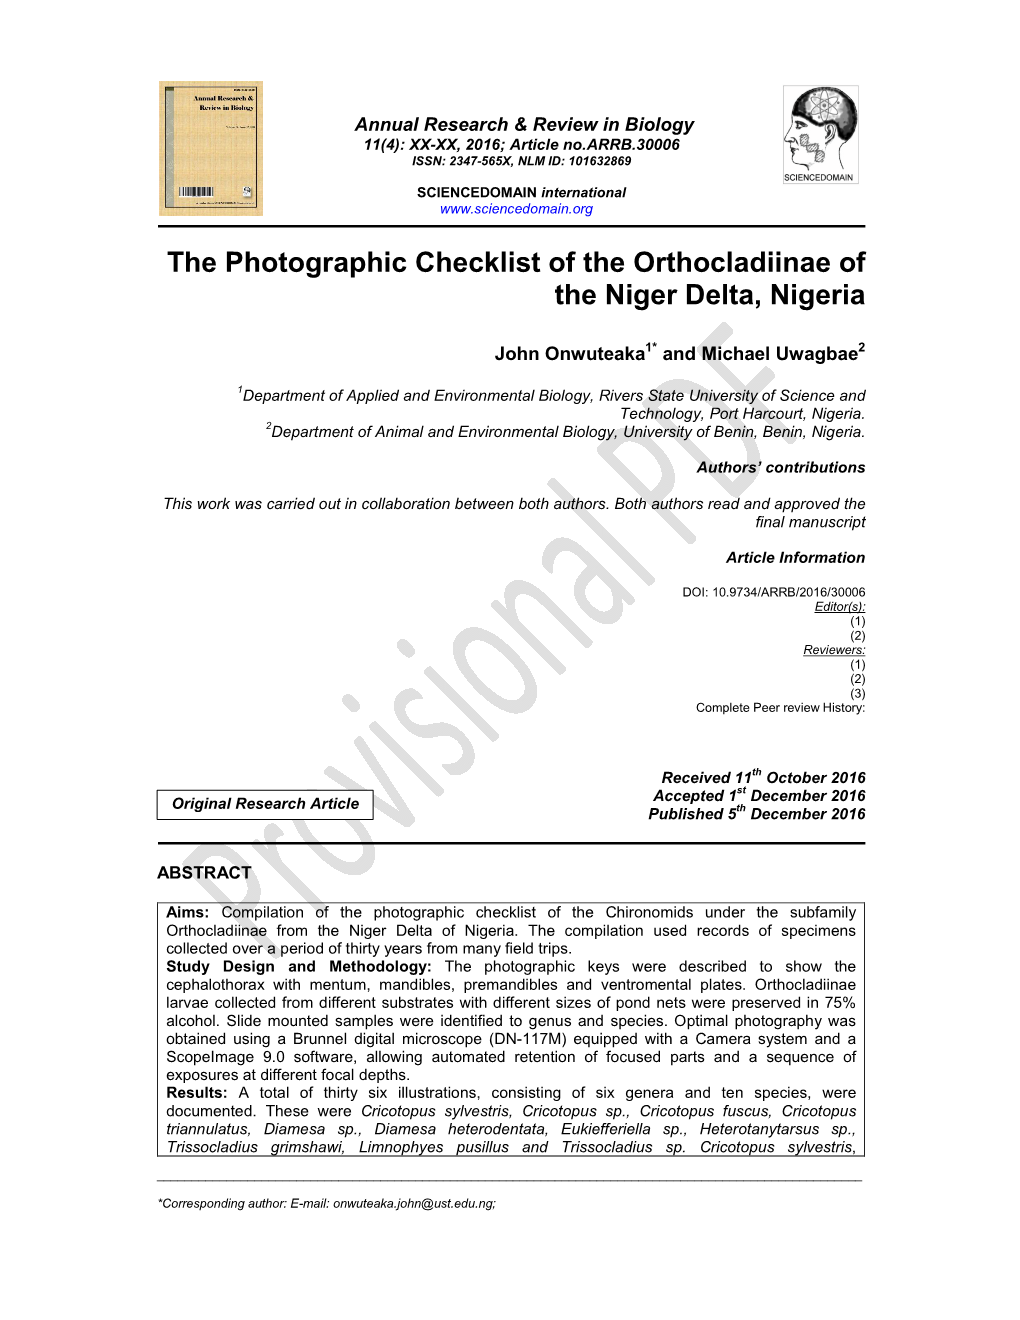 The Photographic Checklist of the Orthocladiinae of the Niger Delta, Nigeria